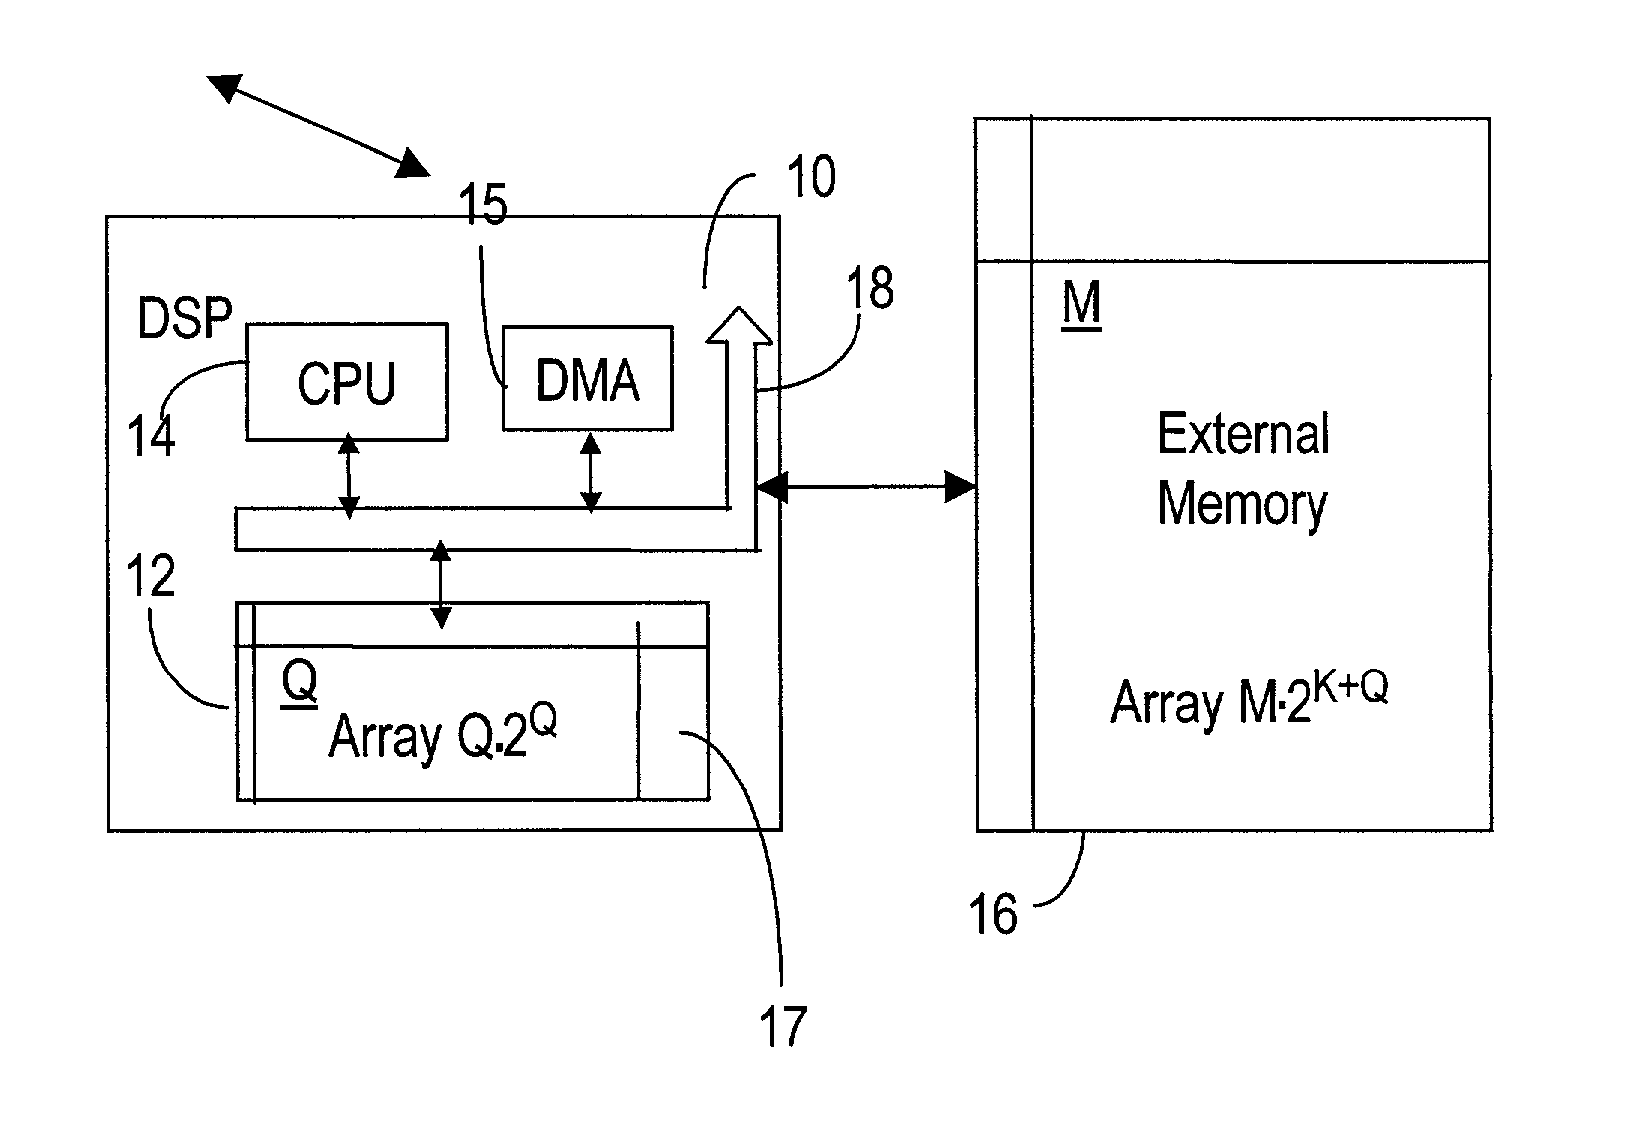 Real-time method for bit-reversal of large size arrays